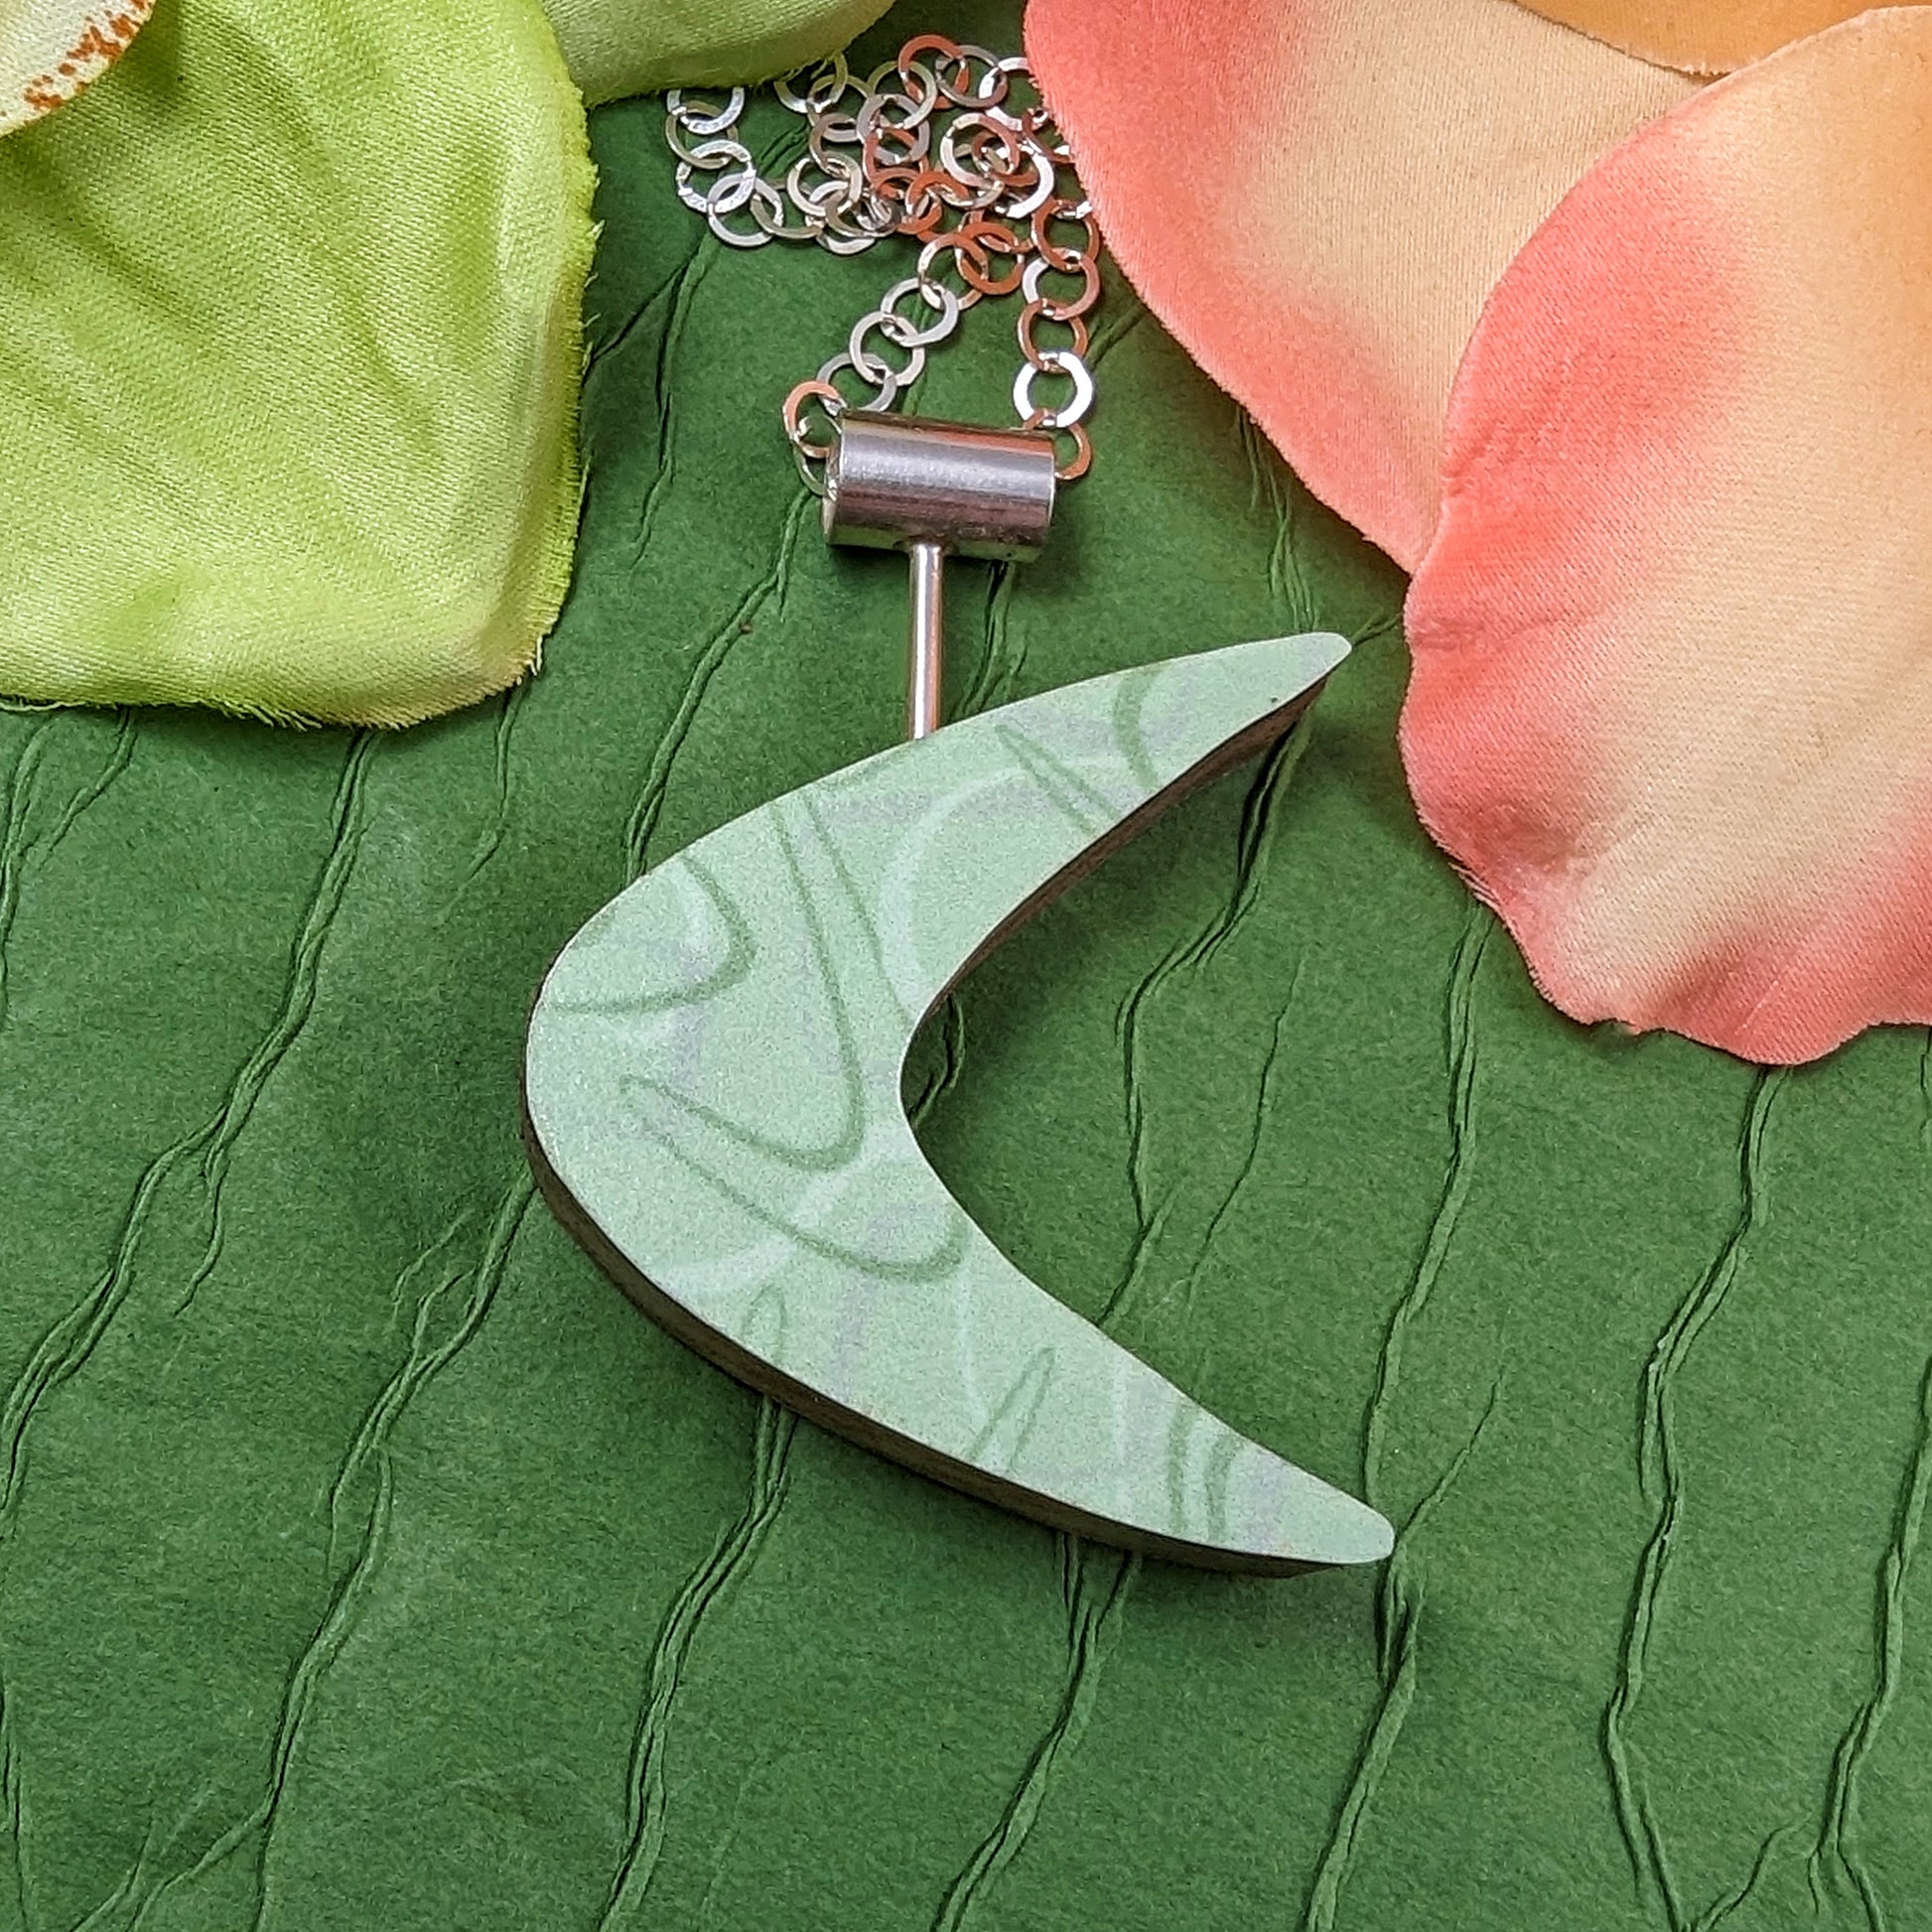 Boomerang shaped laminate on wood necklace on a green background